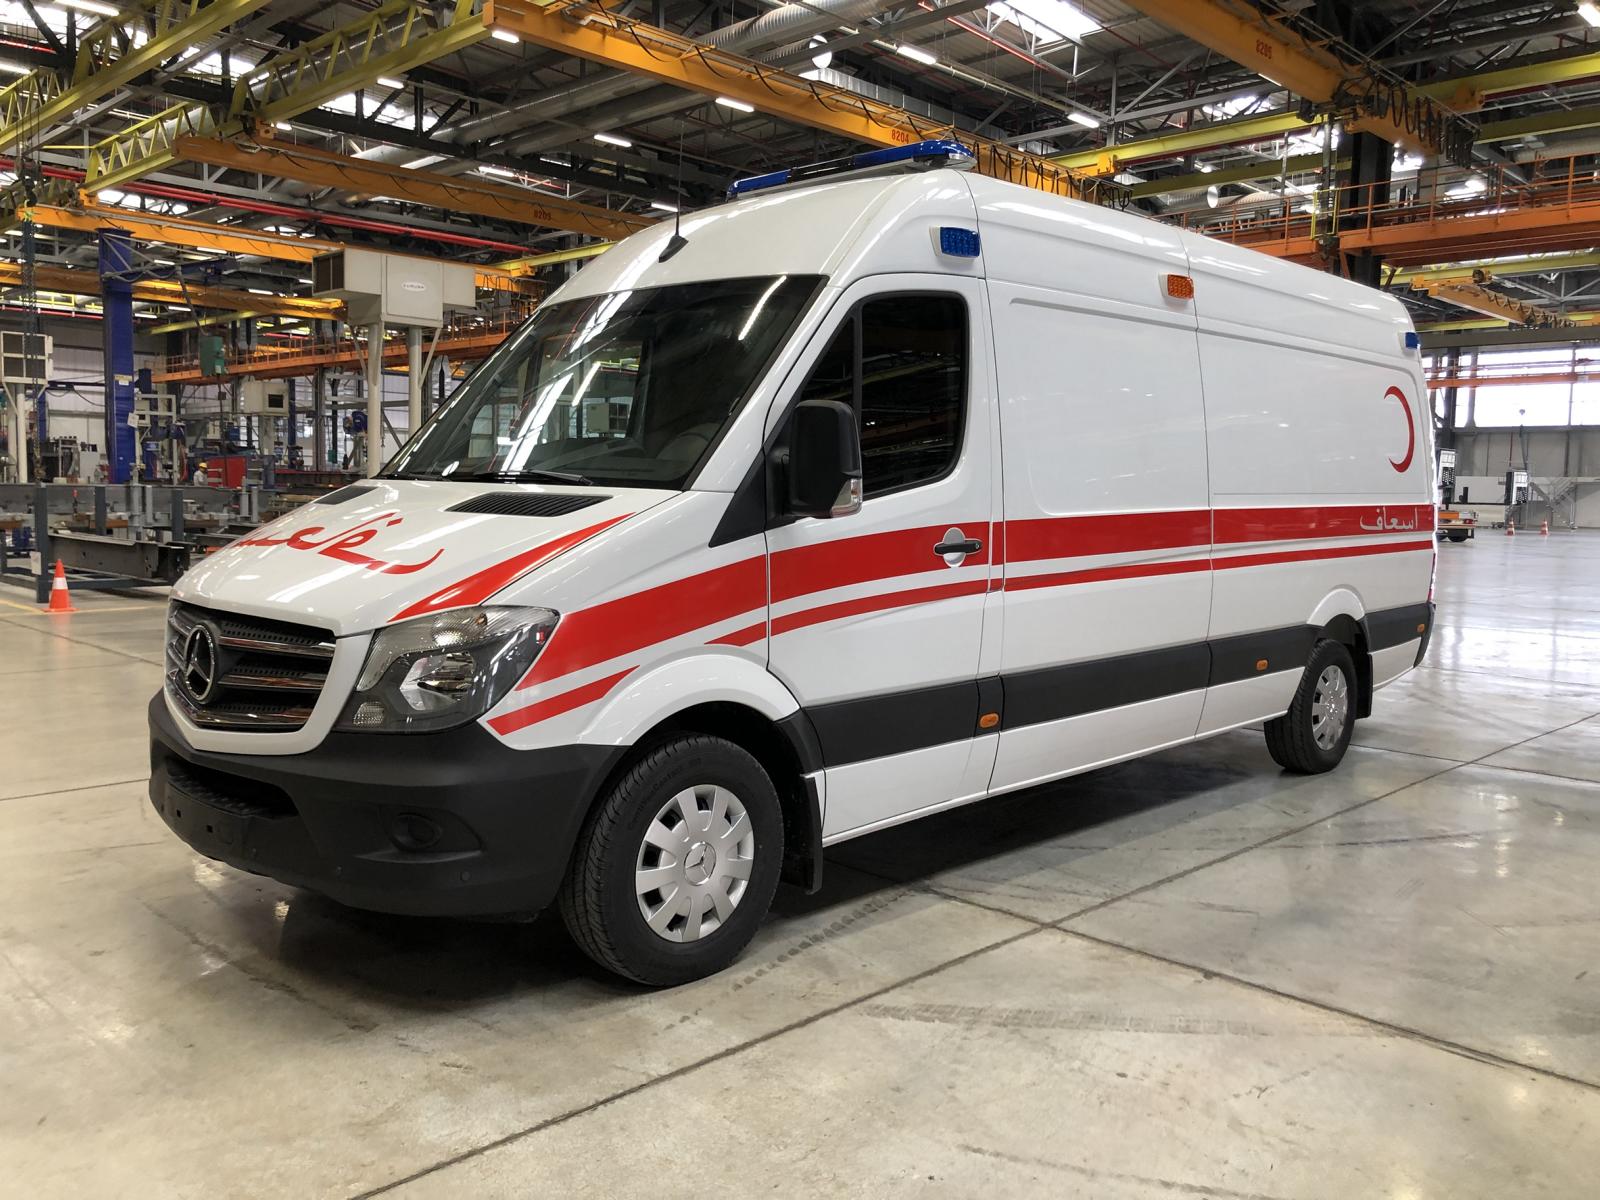 Offer - Emergency Ambulance MB Sprinter 314 & 316 - 2018 and 2020 Model AVAILABLE UNITS - LHD